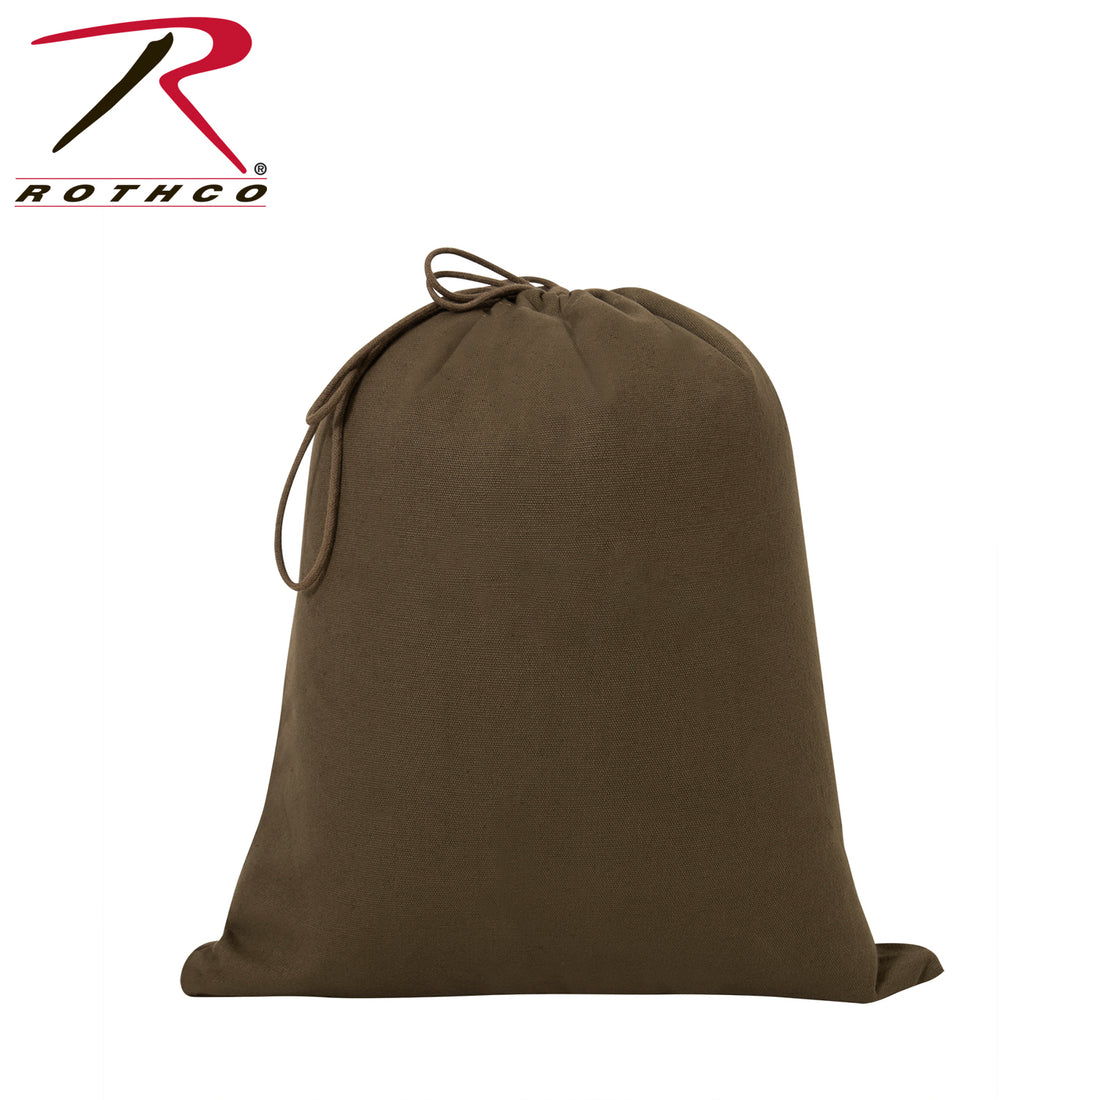 2573 Rothco Military Ditty Bag - 16 Inches x 19 Inches